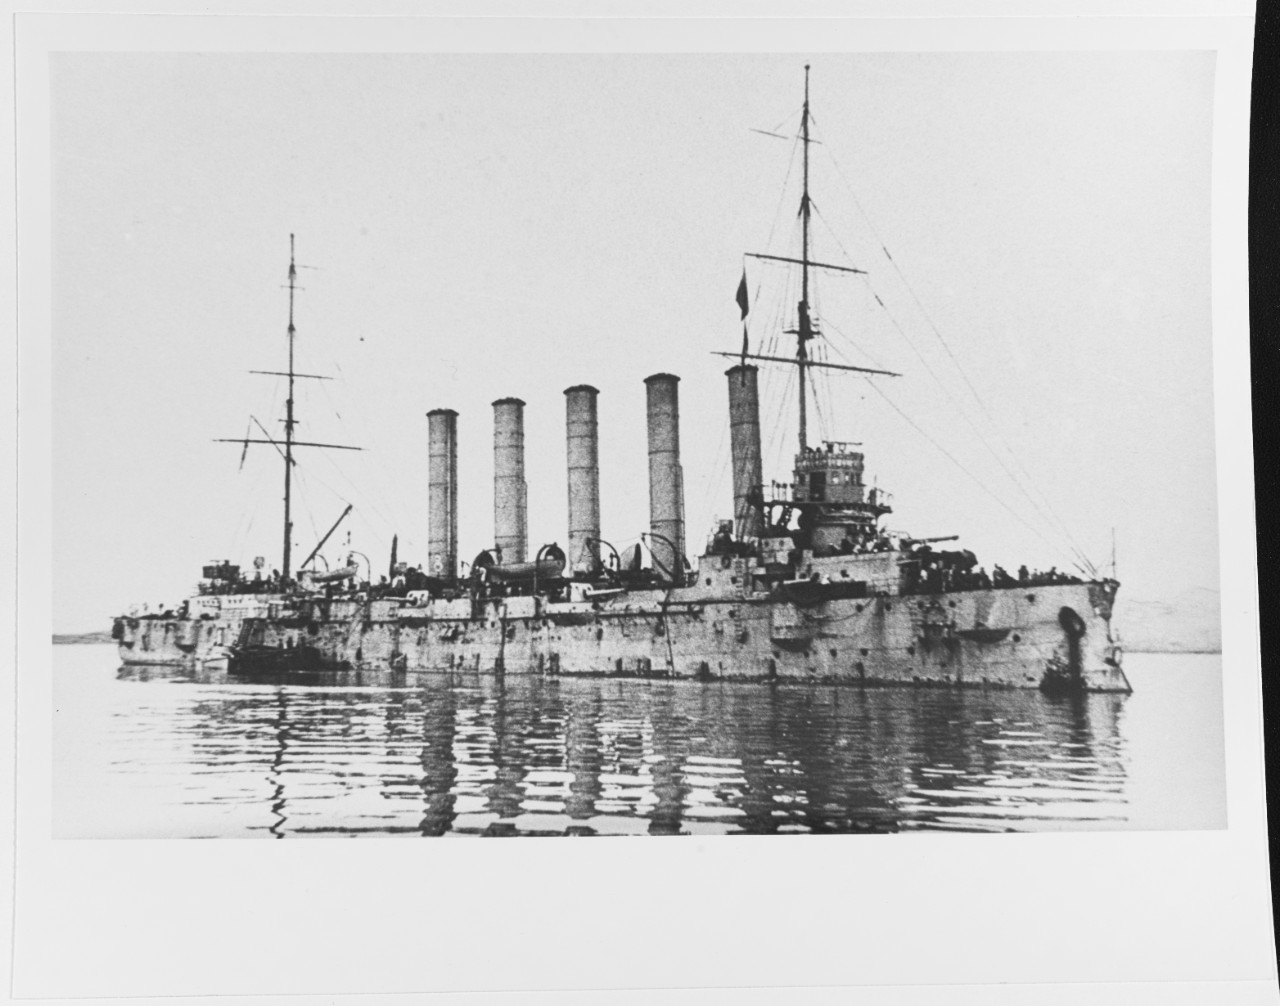 ASKOLD (Russian protected cruiser, 1900-ca. 1920)